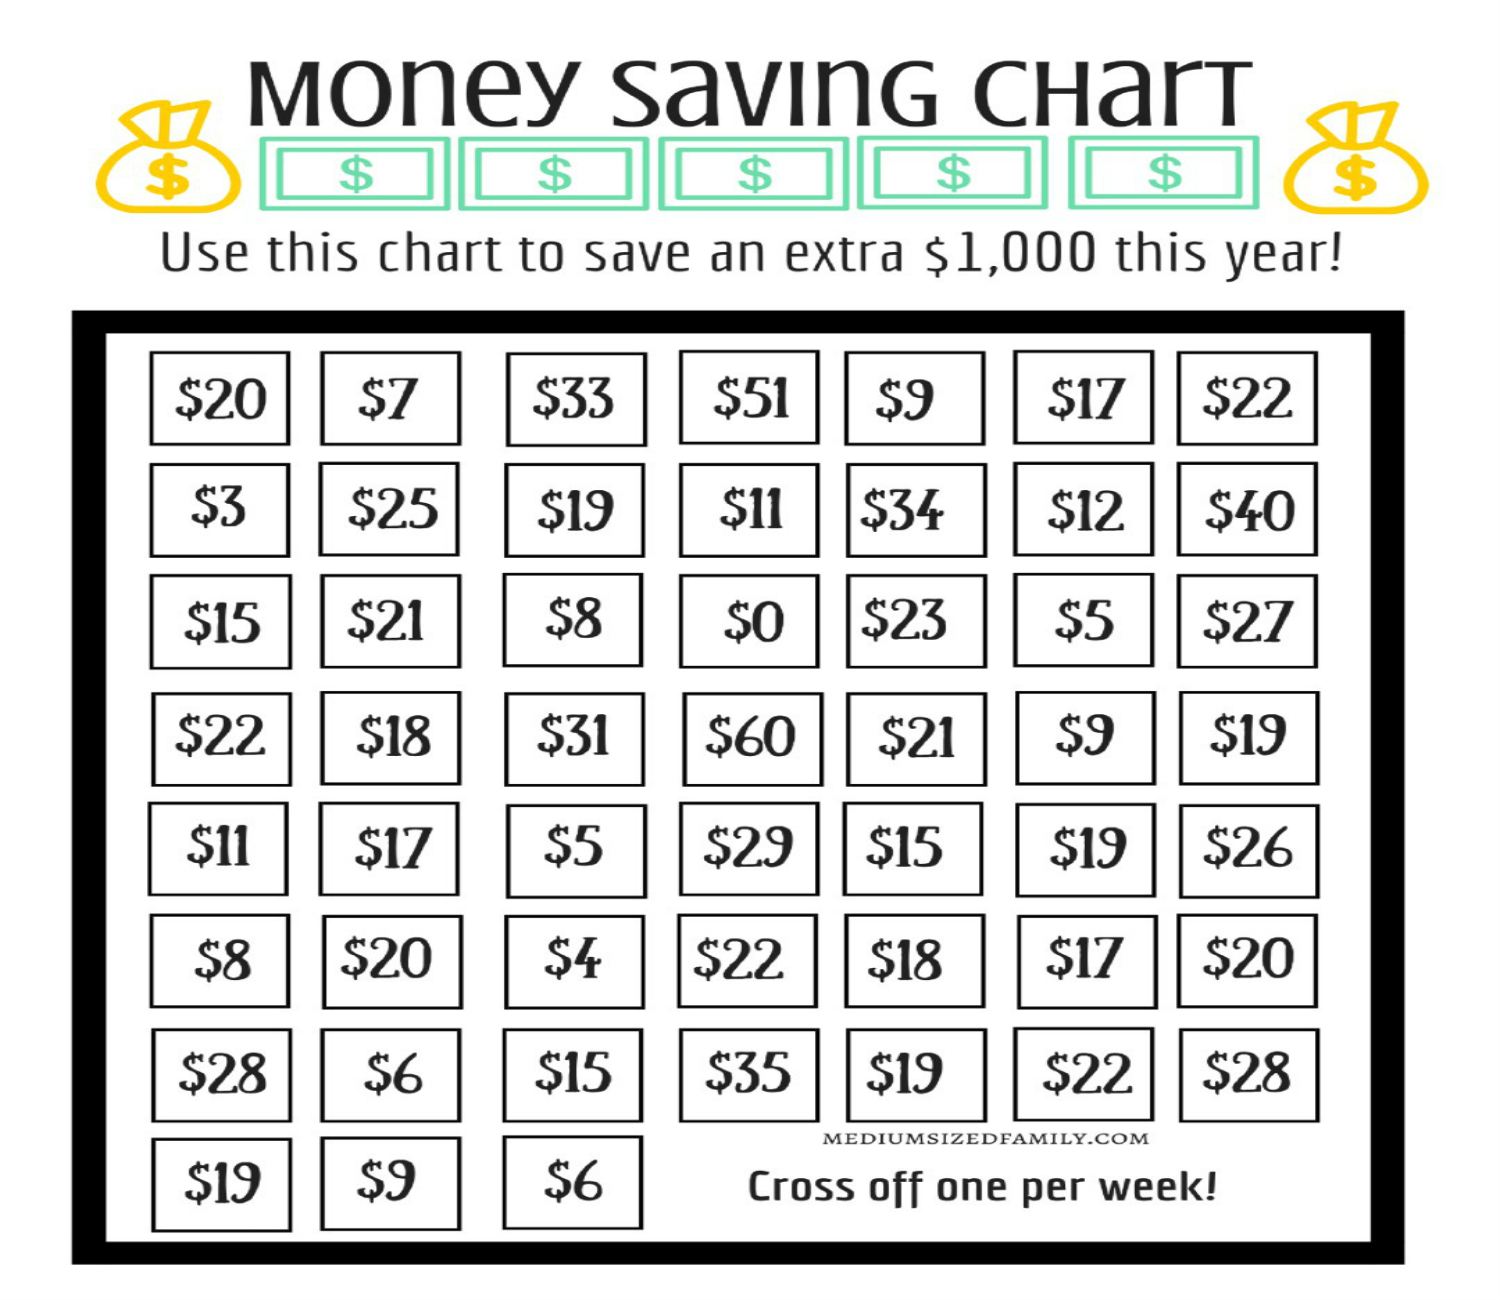 Genius Chart Shows The Easiest Way To Save 1000 In One Year 